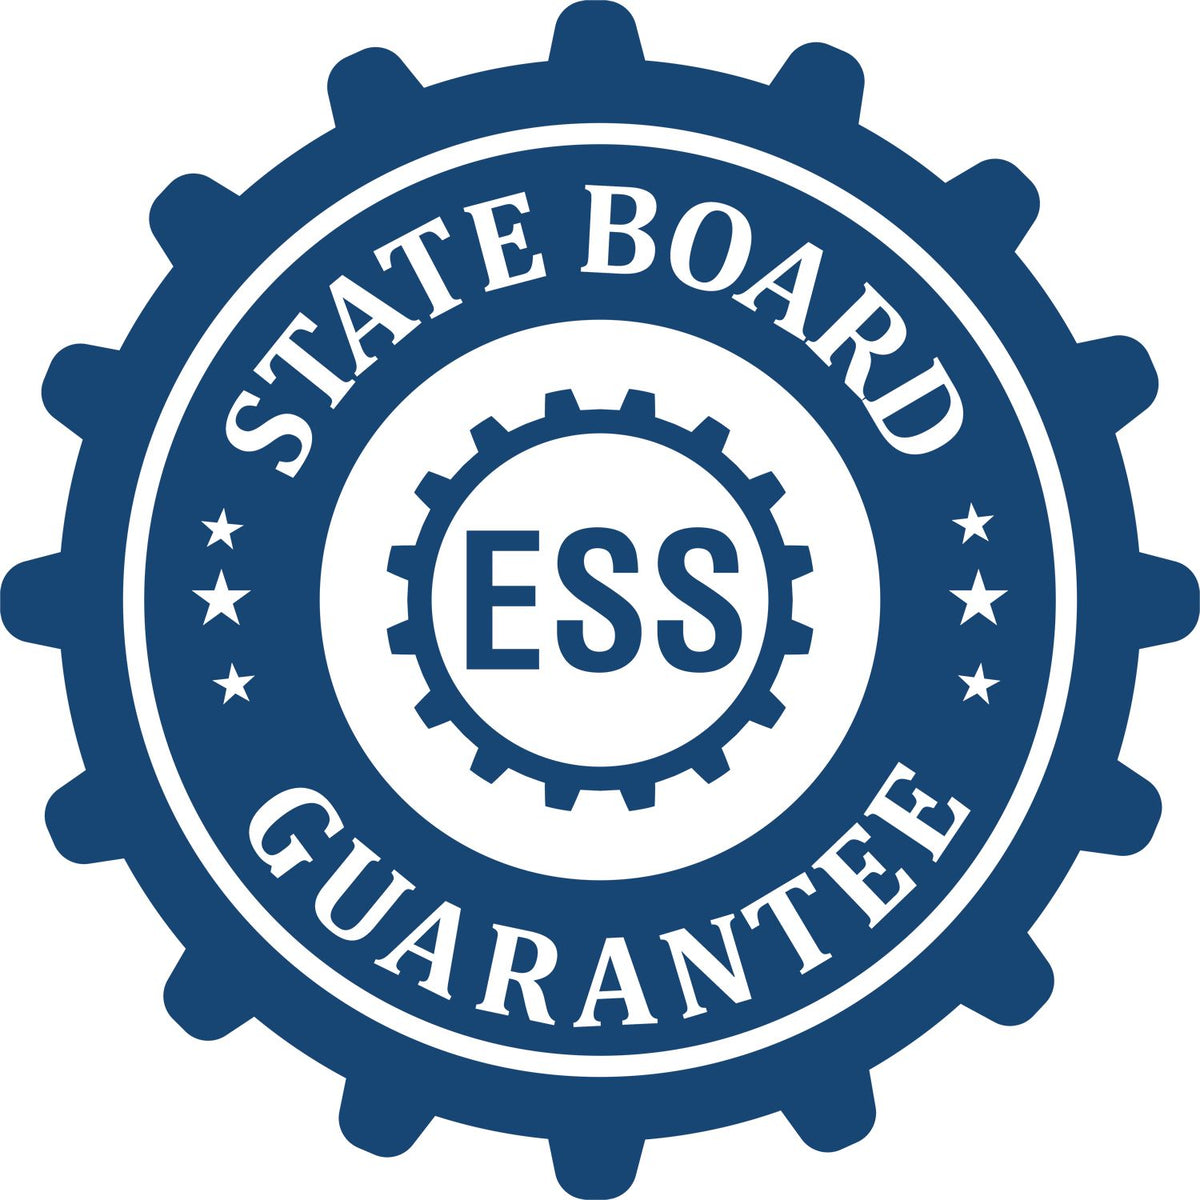 An emblem in a gear shape illustrating a state board guarantee for the State of Arizona Long Reach Architectural Embossing Seal product.